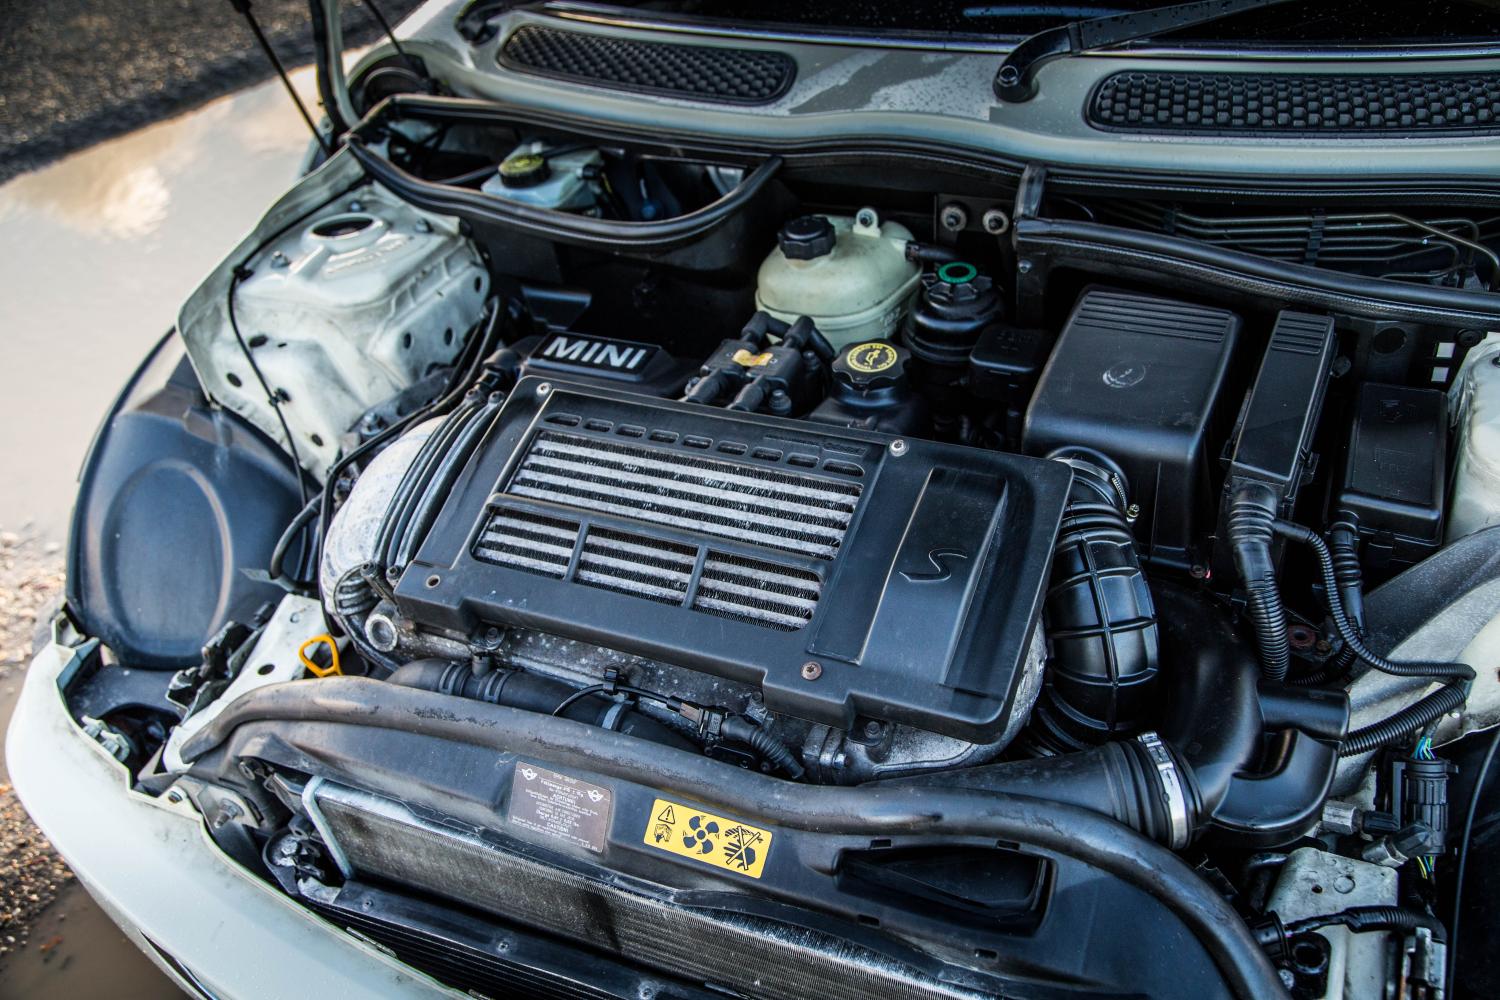 The R50/53 Mini Engine Is Part Chrysler, And It's Still Made Today